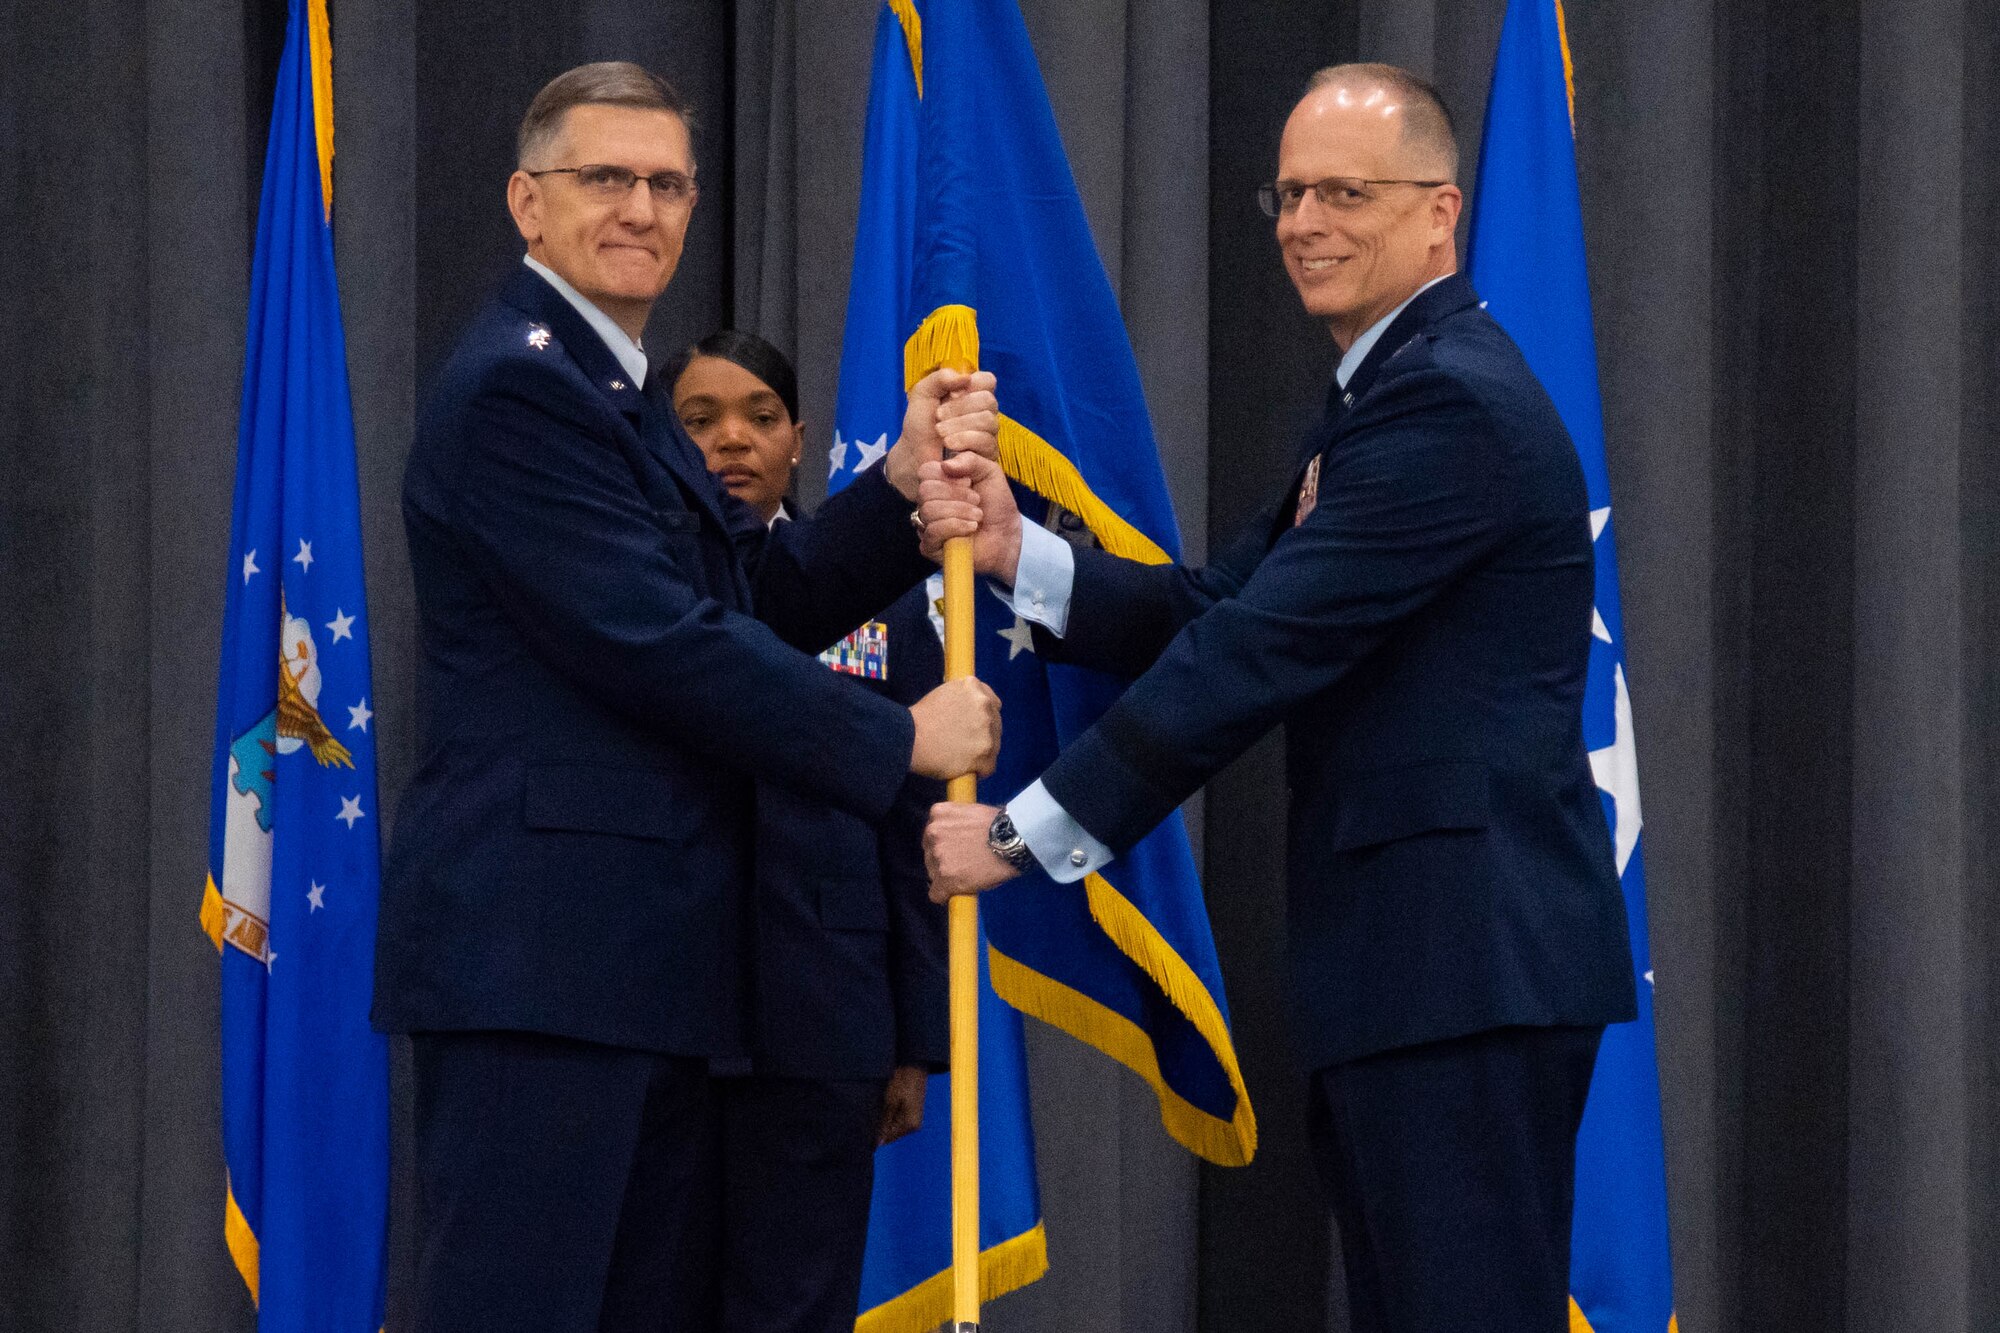 Maj. Gen. Mark Weatherington takes command of The Mighty Eighth and J-GSOC